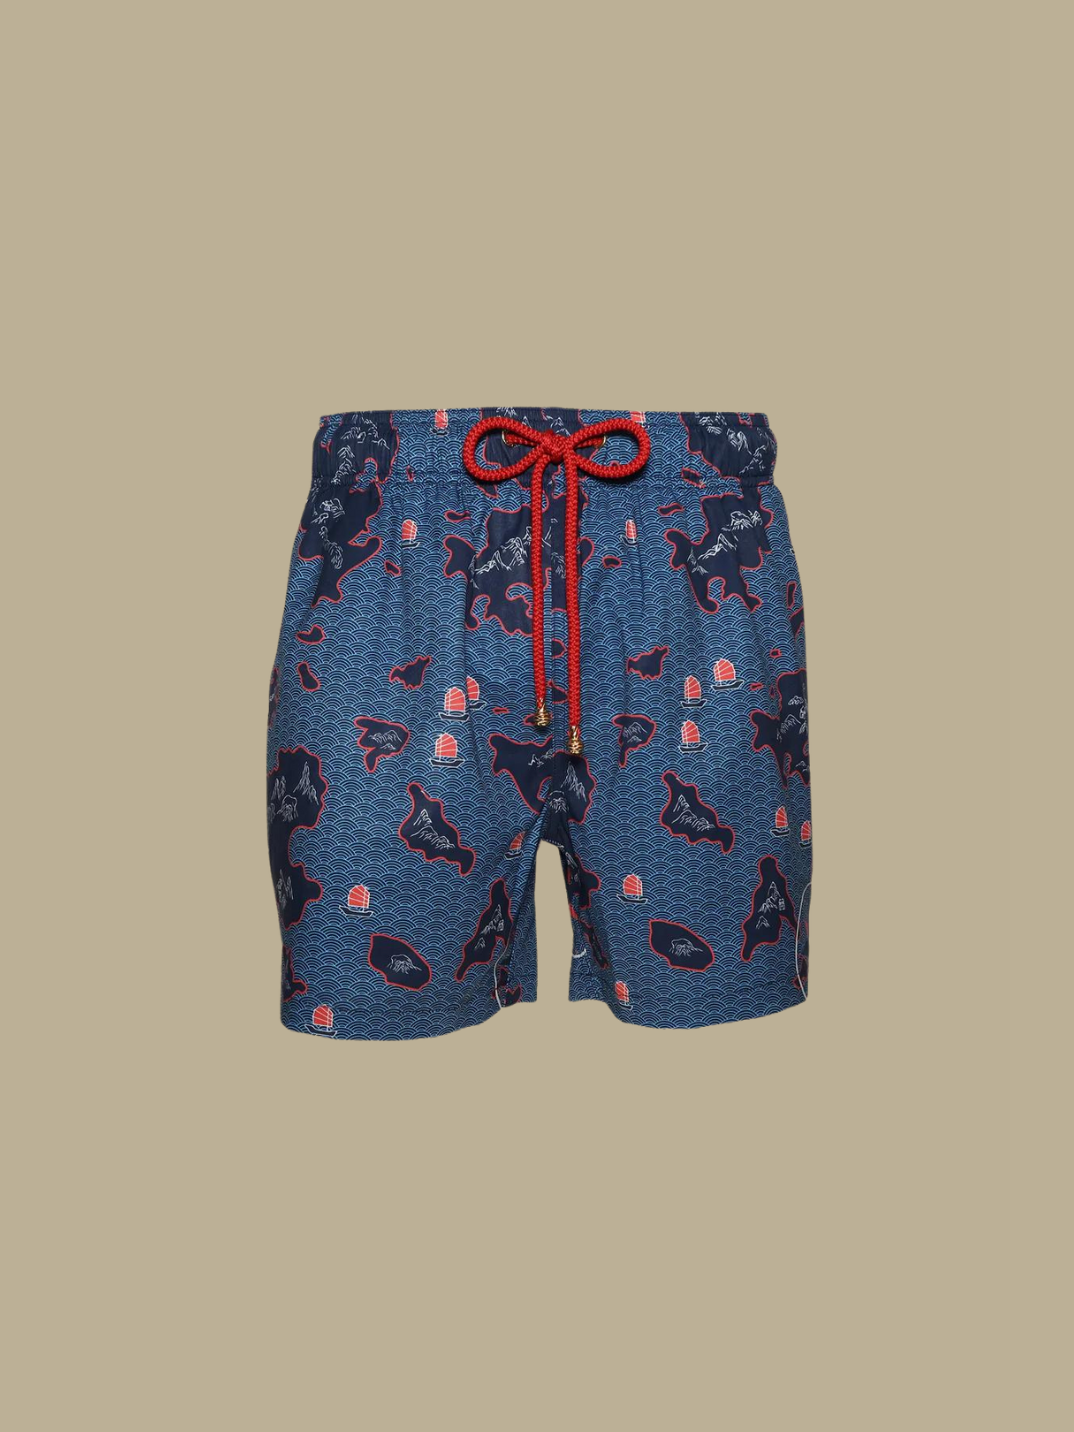 men's swimwear made from recycled plastic bottles swim trunks inspired by the ocean shop sustainable ethical fashion trendy men's clothing